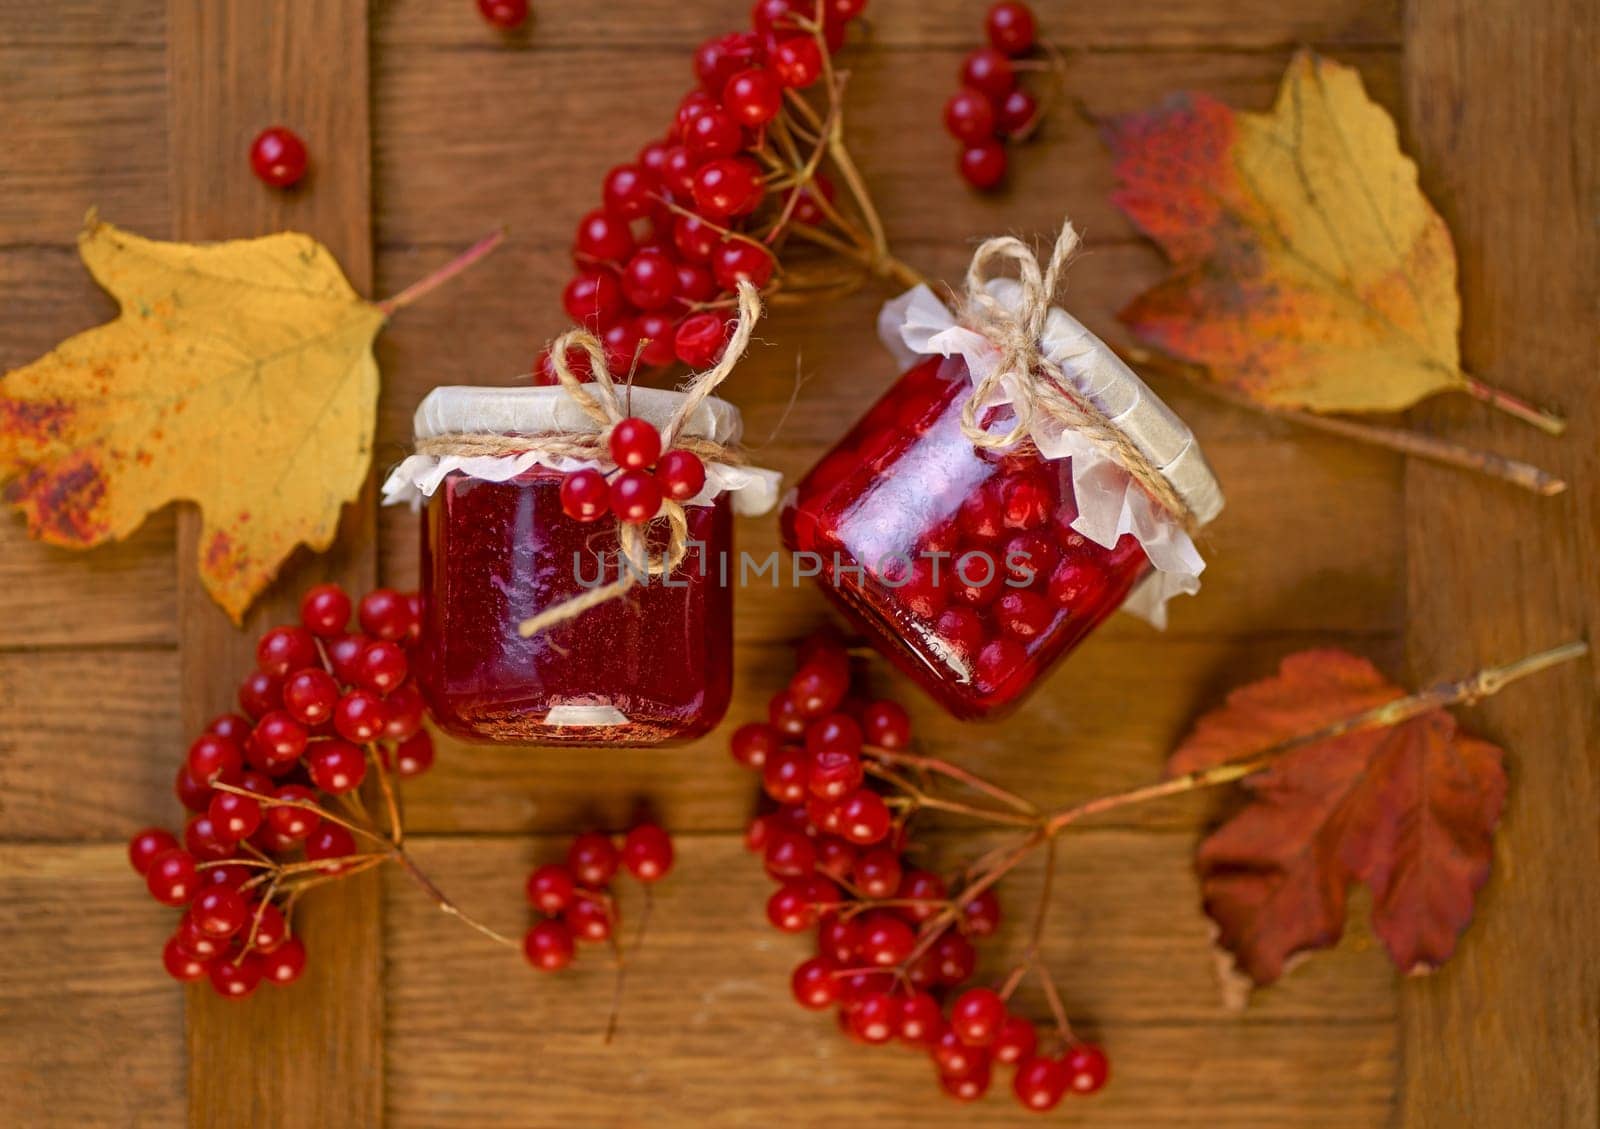 Home preparations. Viburnum jam in a glass jar on a wooden table near fresh viburnum berries and autumn berries by aprilphoto